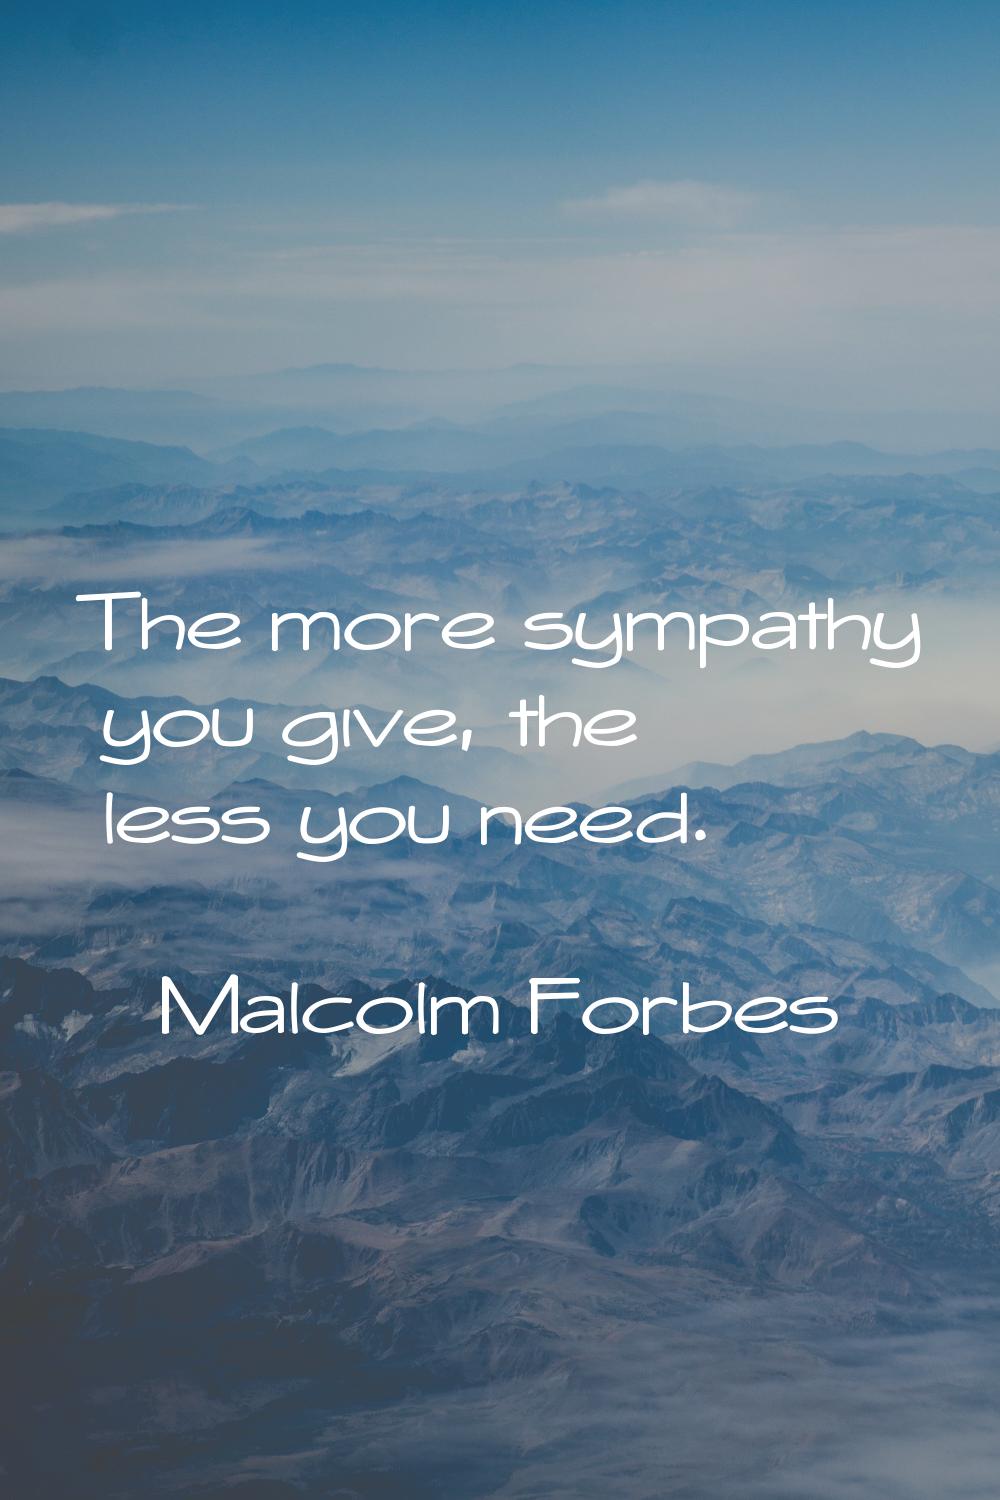 The more sympathy you give, the less you need.